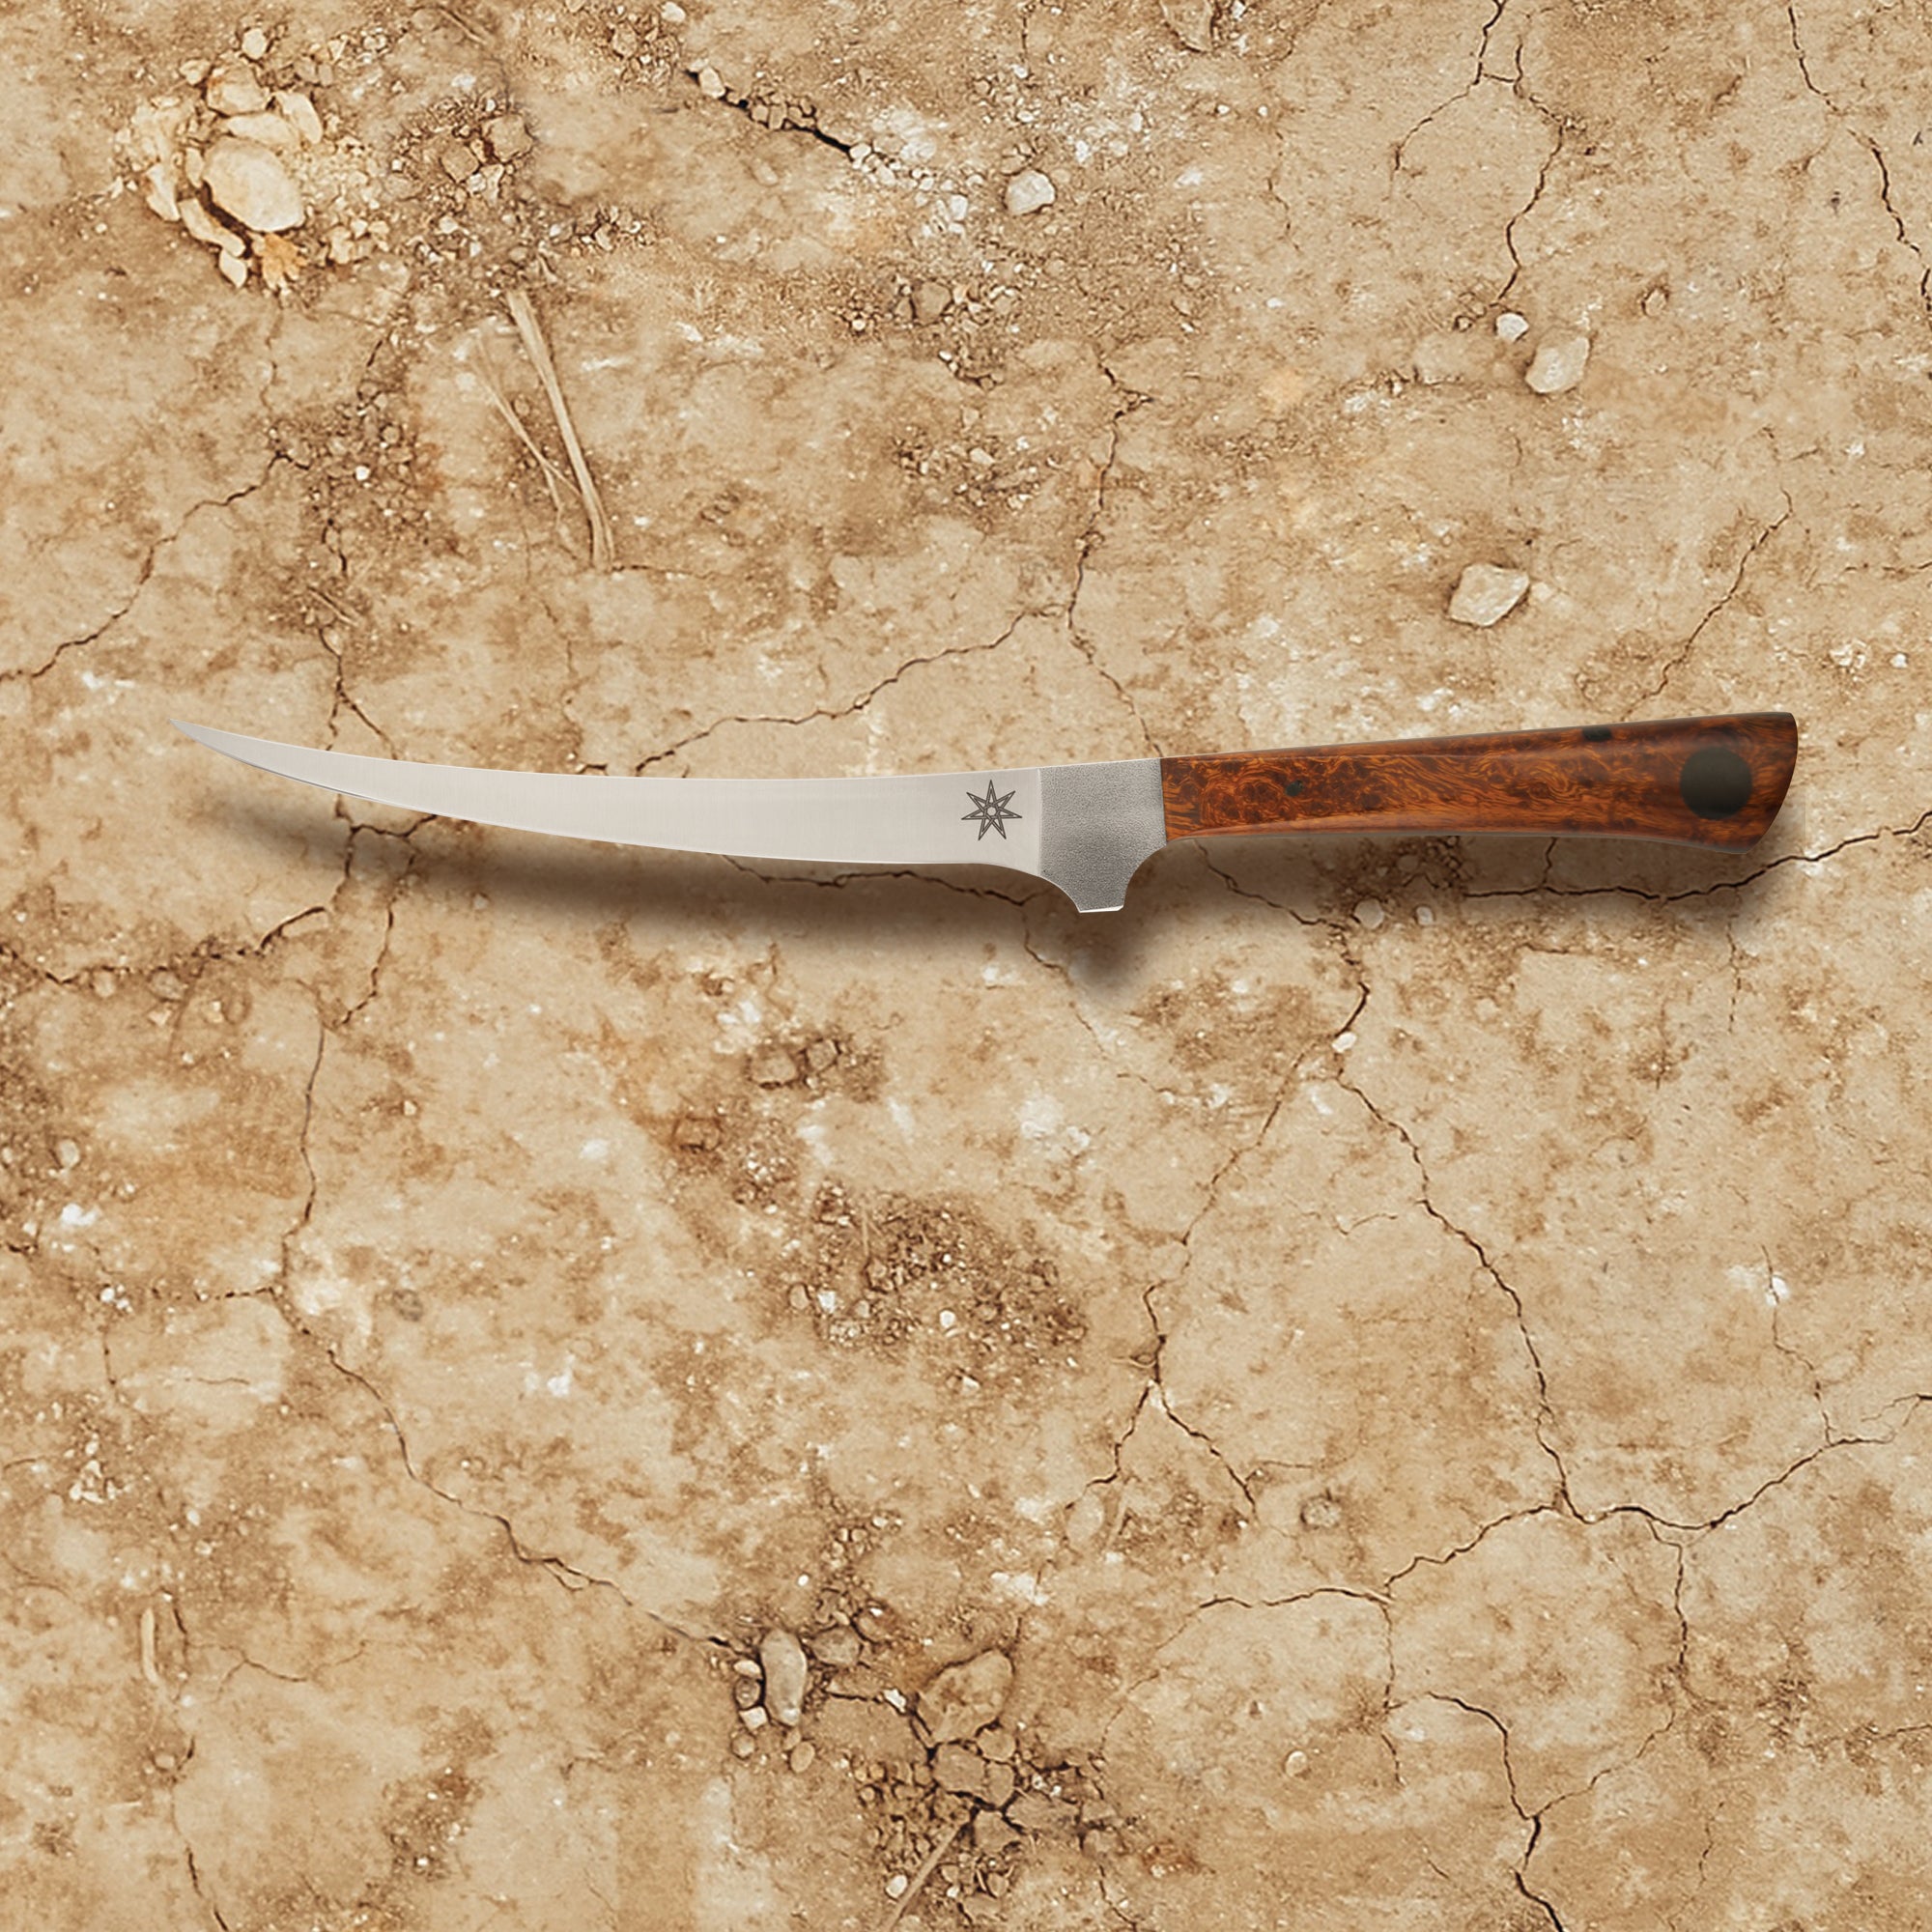 Town Cutler 6" Curved Boning knife with luxury wood handle. Desert ironwood handle on knife with stainless steel blade.